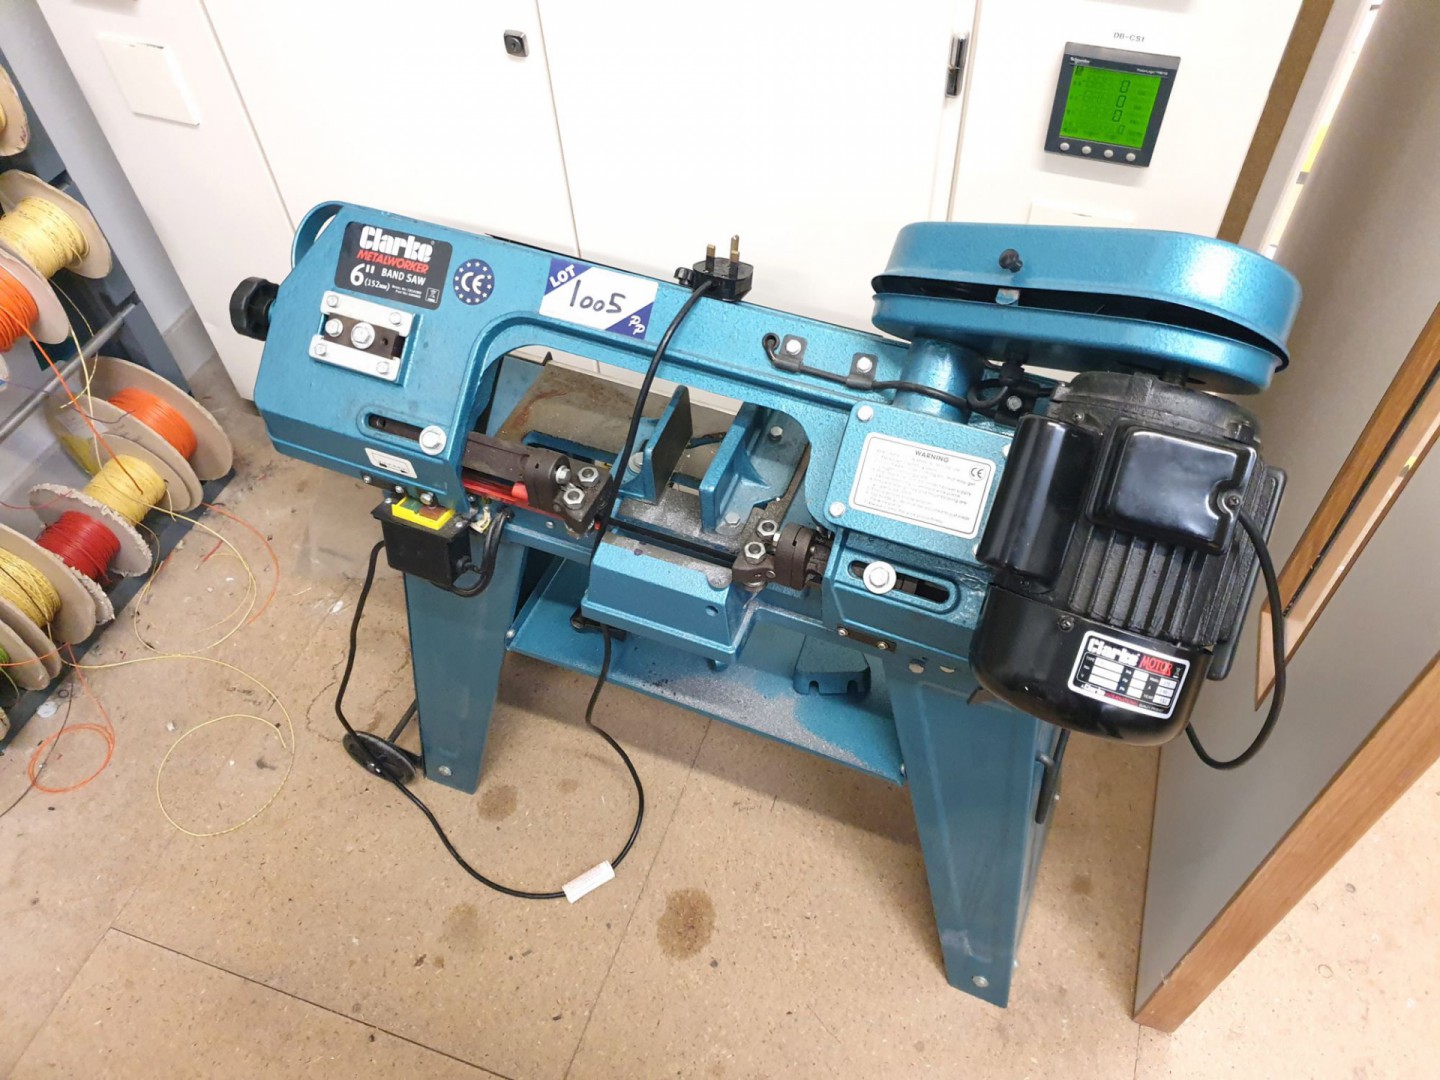 Clarke CB545MD 6" bandsaw, 240v with vice